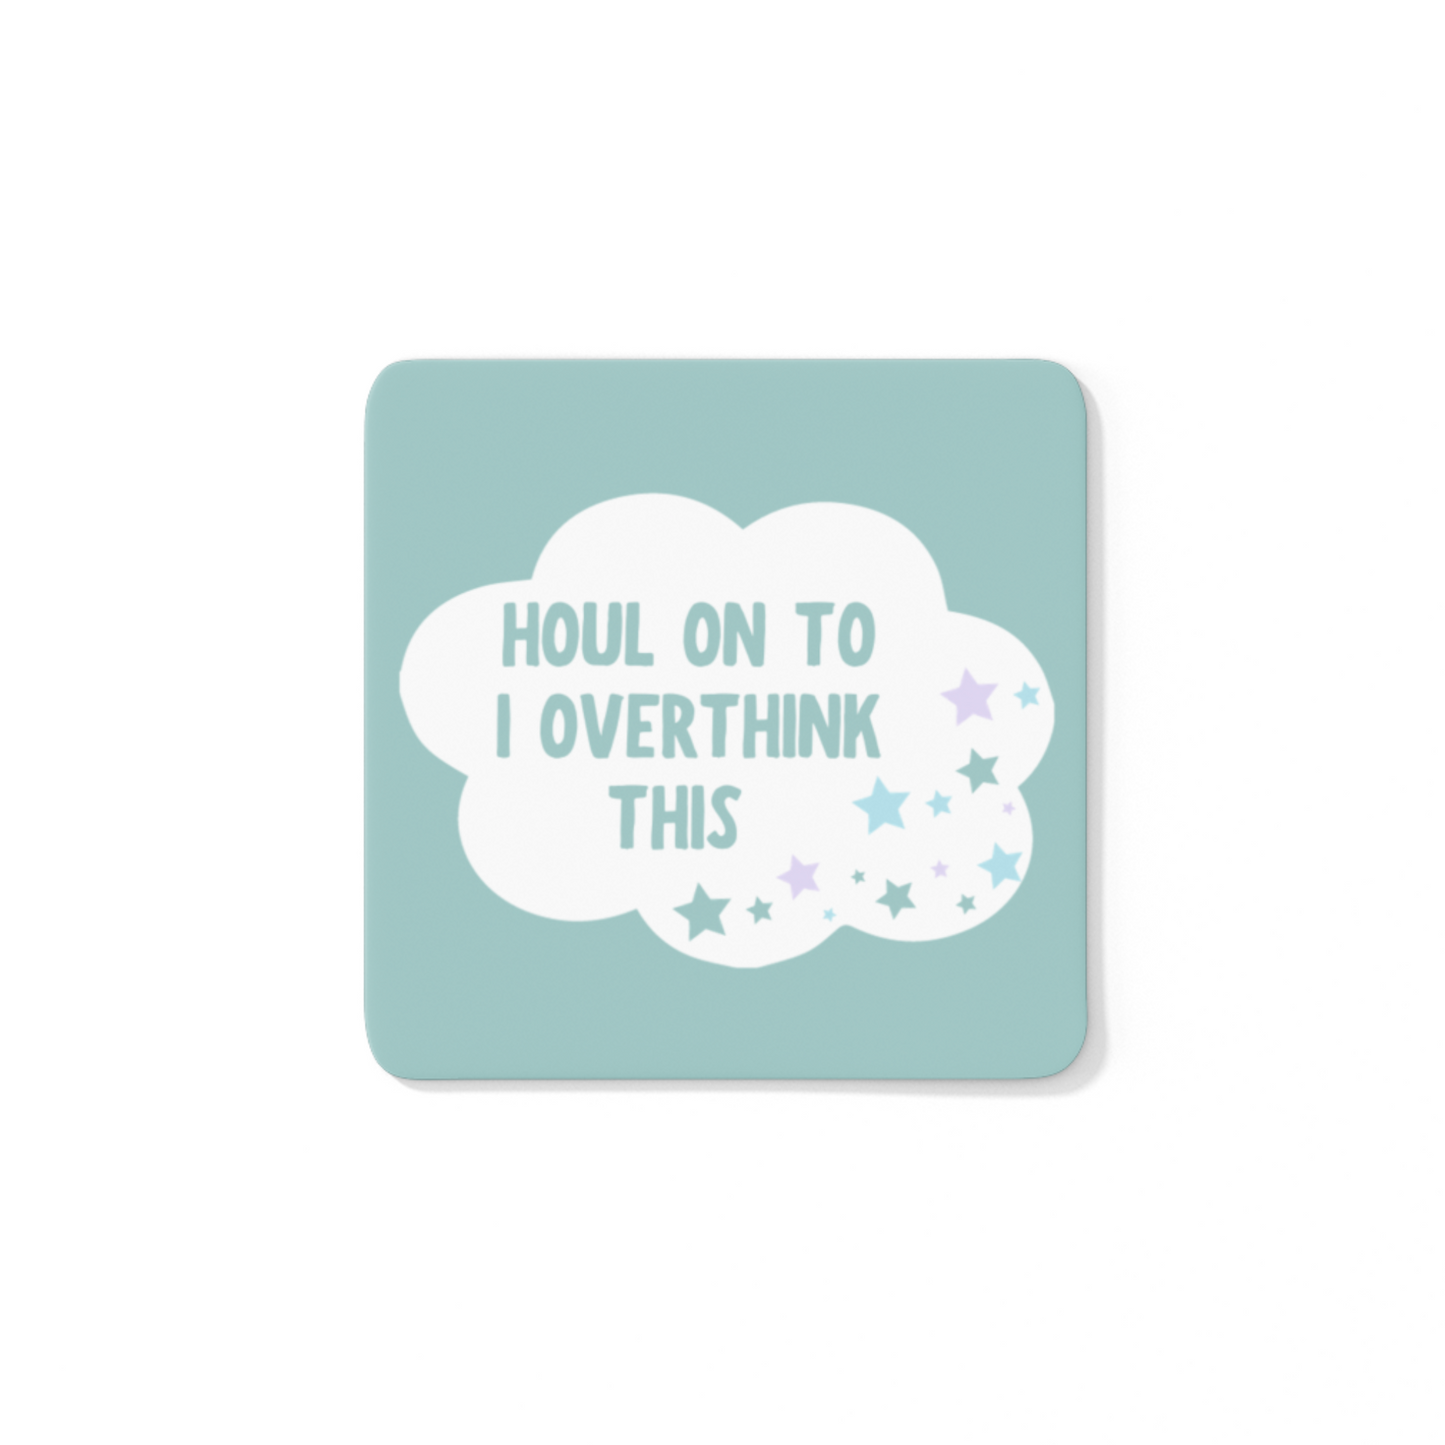 HOUL ON TO I OVERTHINK THIS COASTER